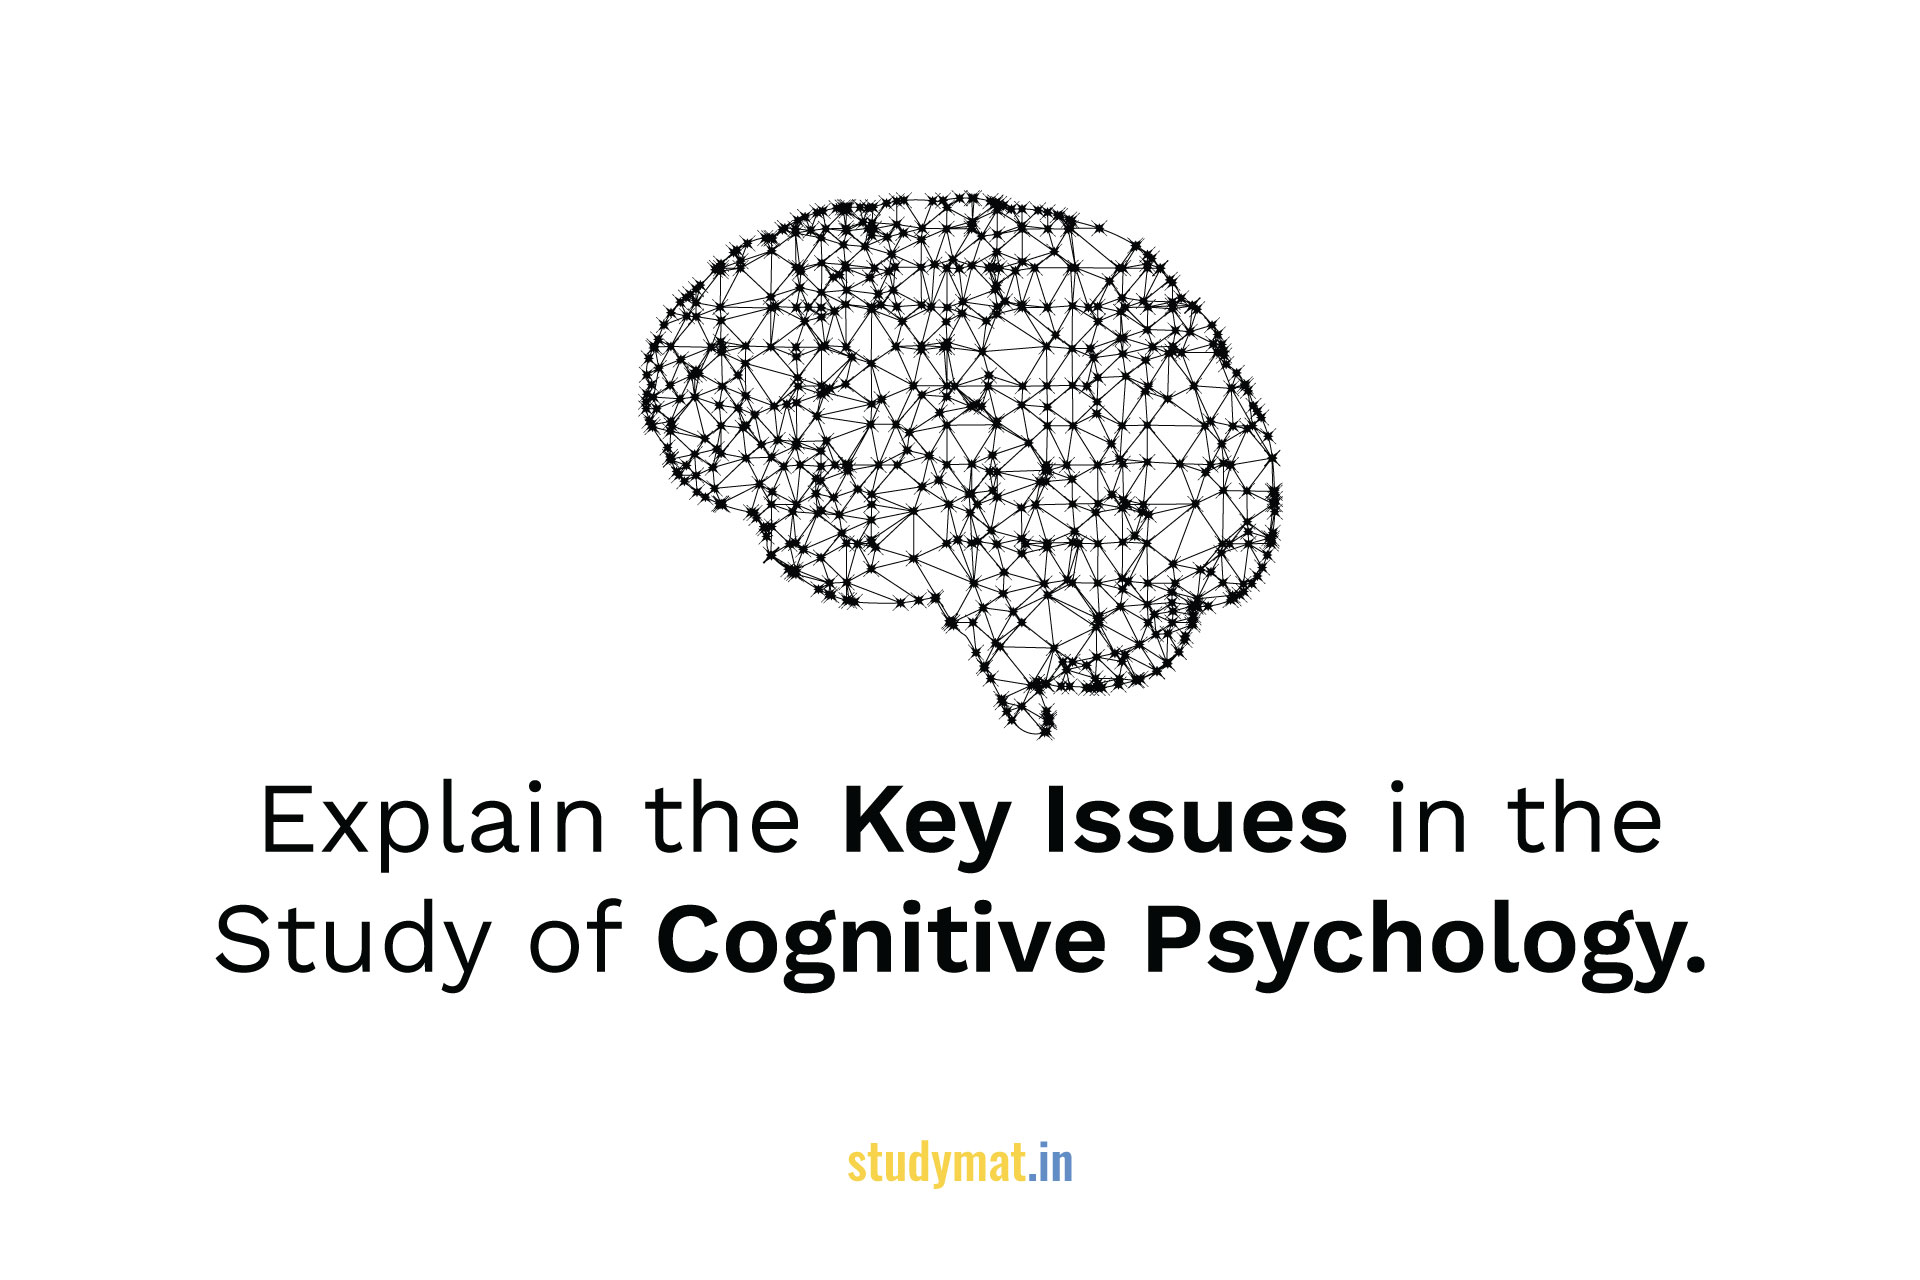 Key Issues in the Study of Cognitive Psychology.